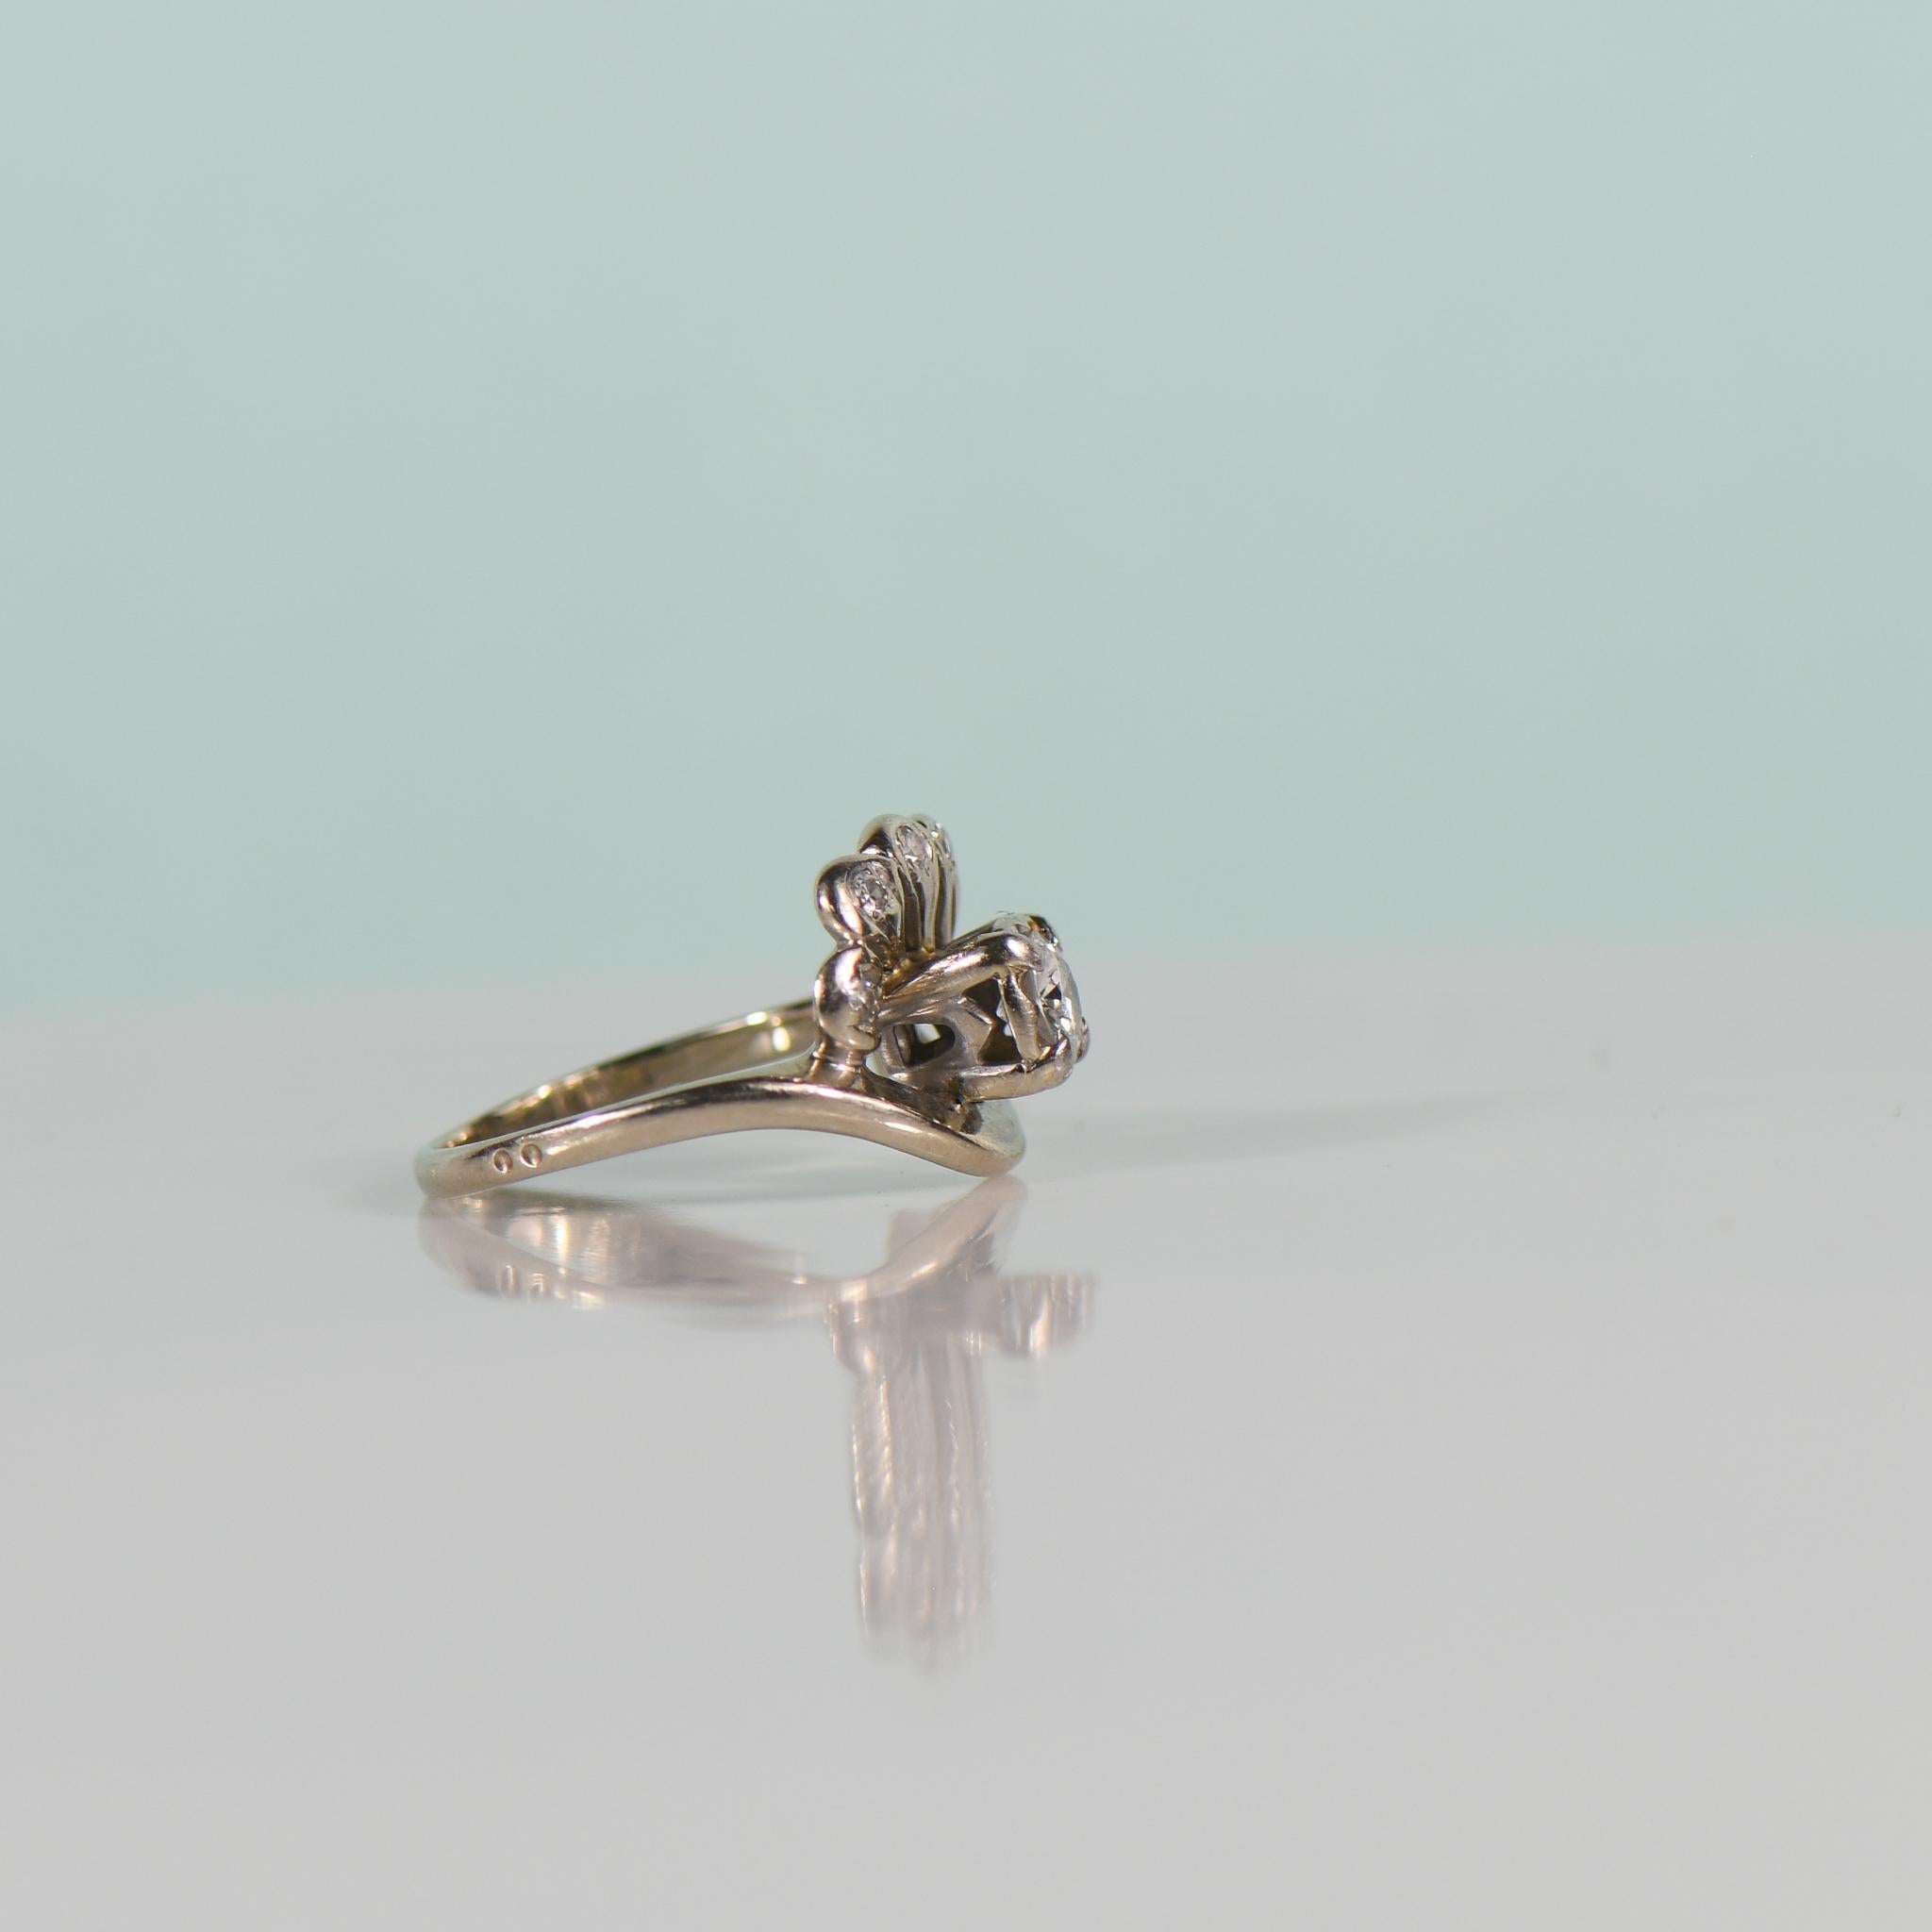 Step back in time with this enchanting Retro cocktail ring featuring a dazzling 0.39 carat Old European Cut diamond, a nod to the glamour of a bygone era. Set in luminous 14k white gold, the diamond takes center stage, exuding a captivating sparkle